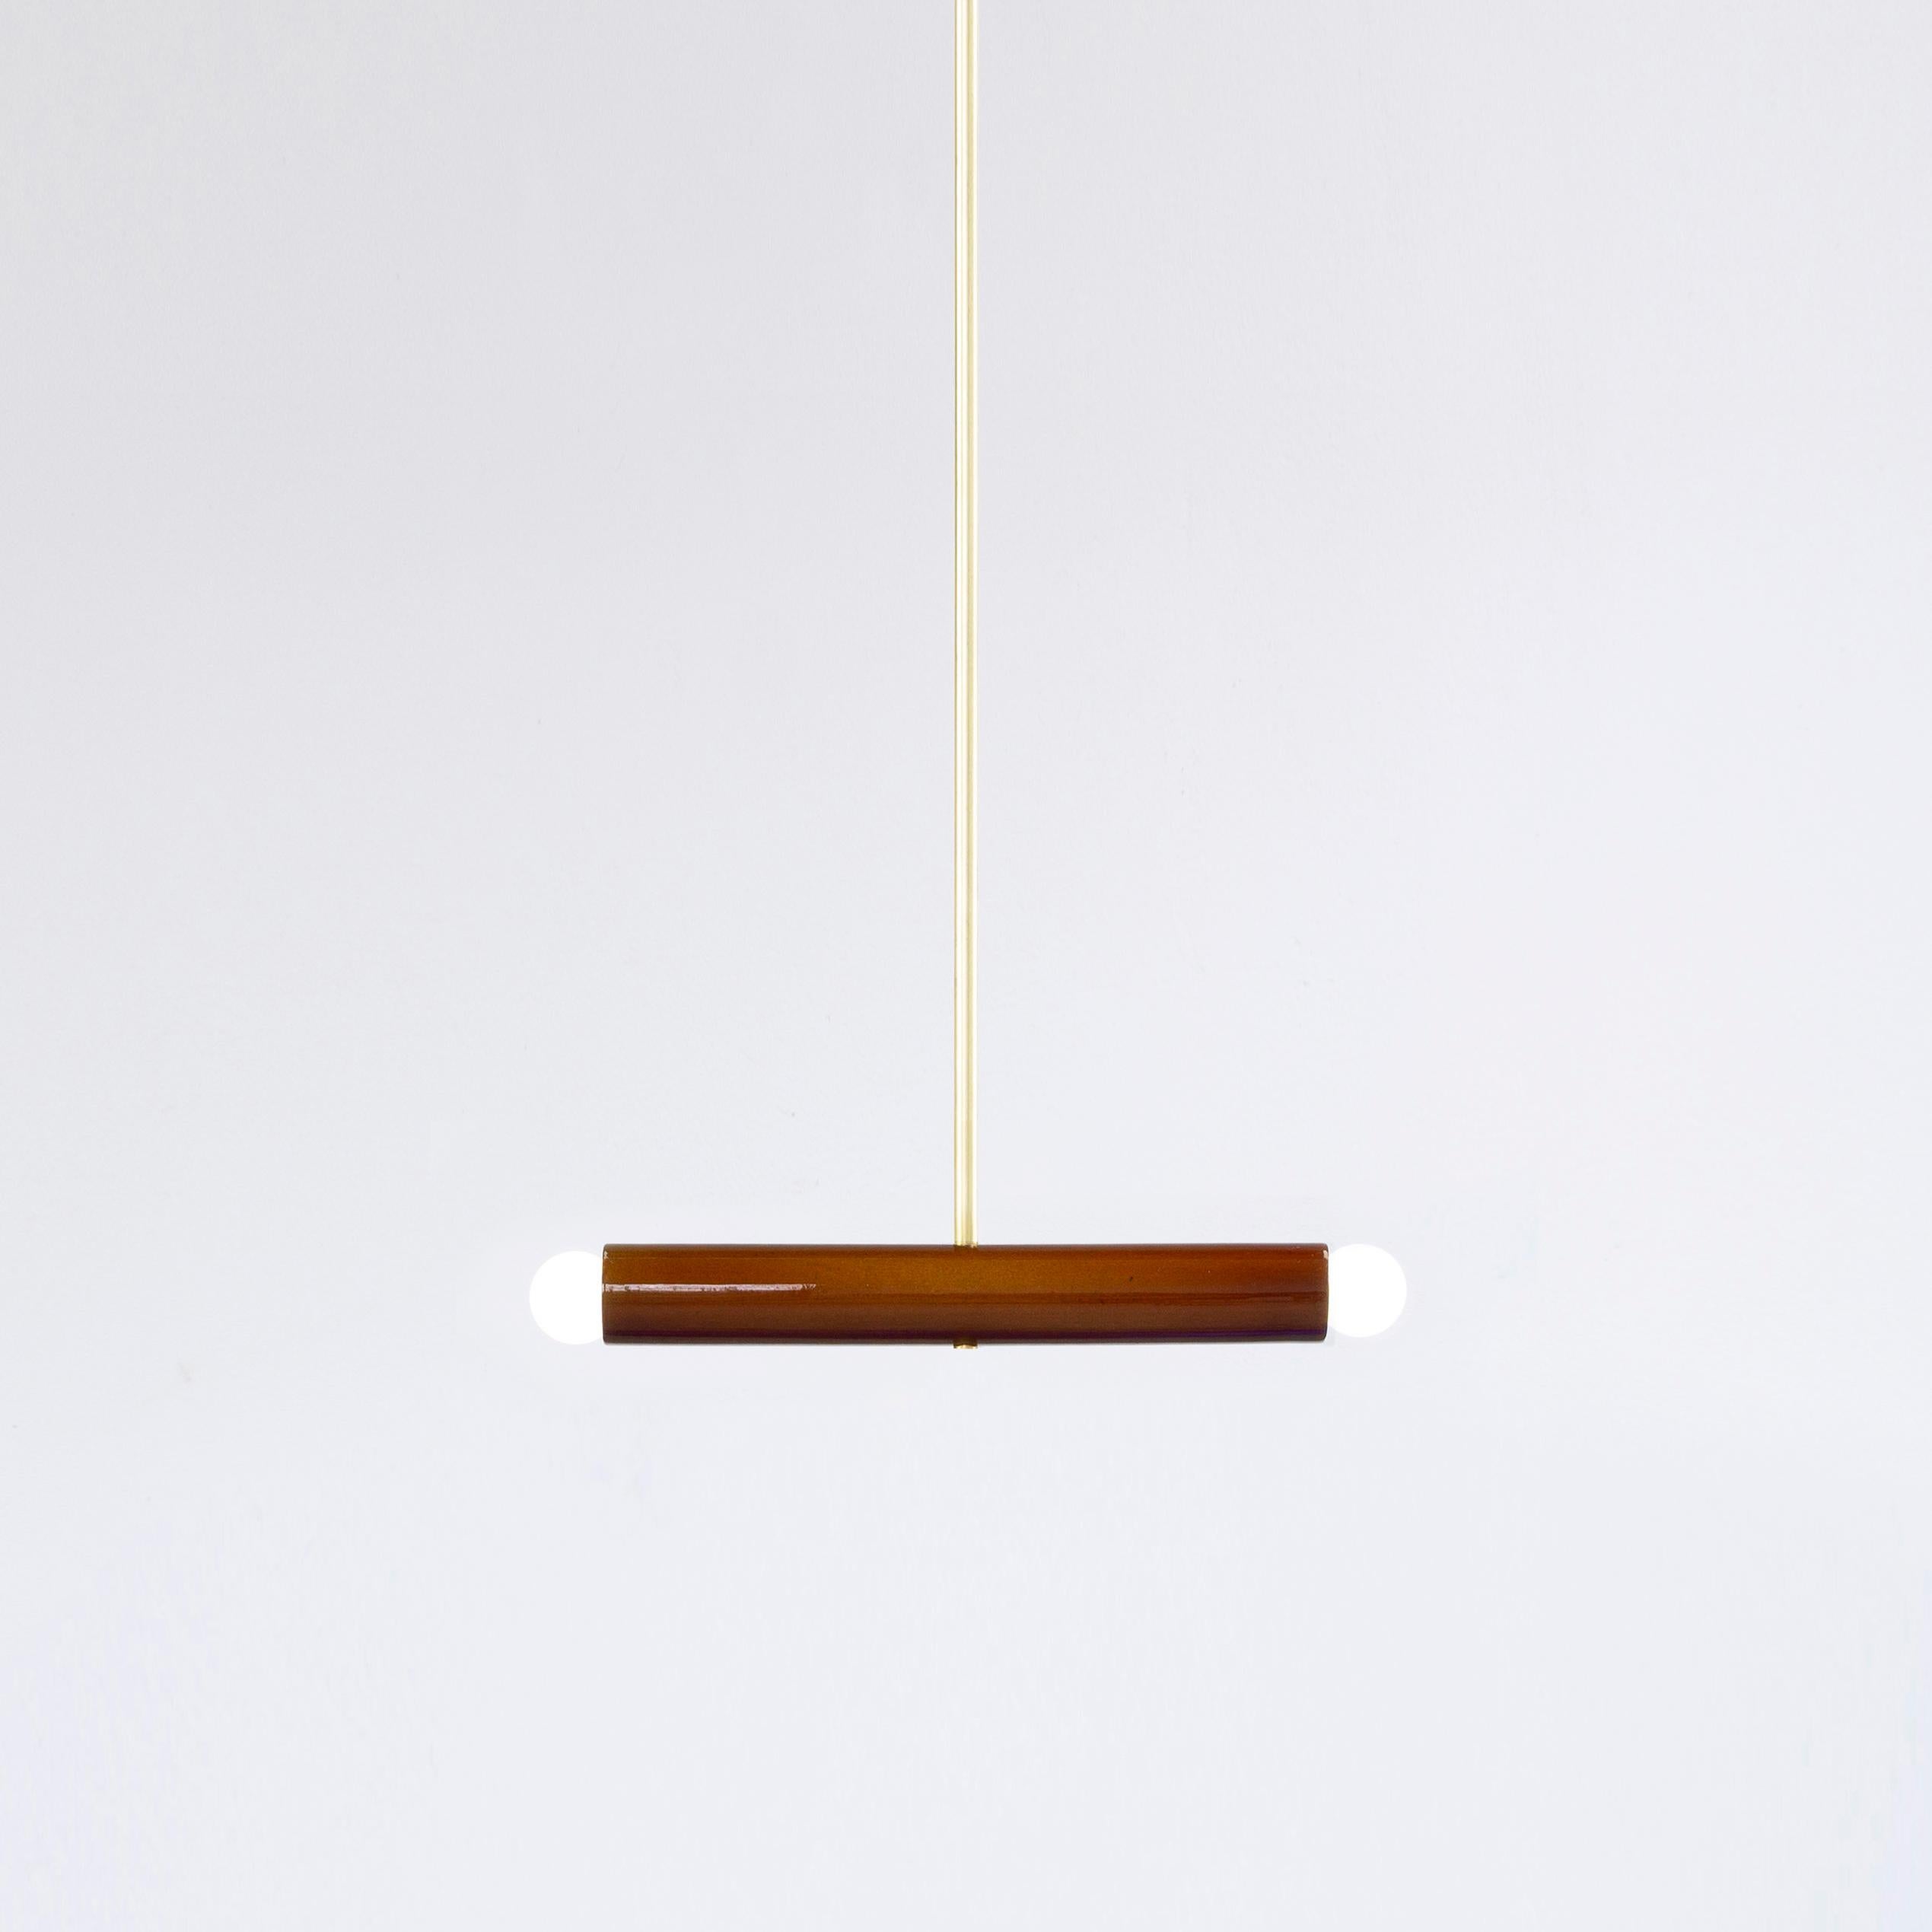 Brown TRN A2 pendant lamp by Pani Jurek
Dimensions: D 5 x W 35 x H 5 cm 
Material: Hand glazed ceramic and brass.
Available in other colors.
Lamps from the TRN collection hang on a metal tube, not on a cable. This allows the lamp to be mounted in a